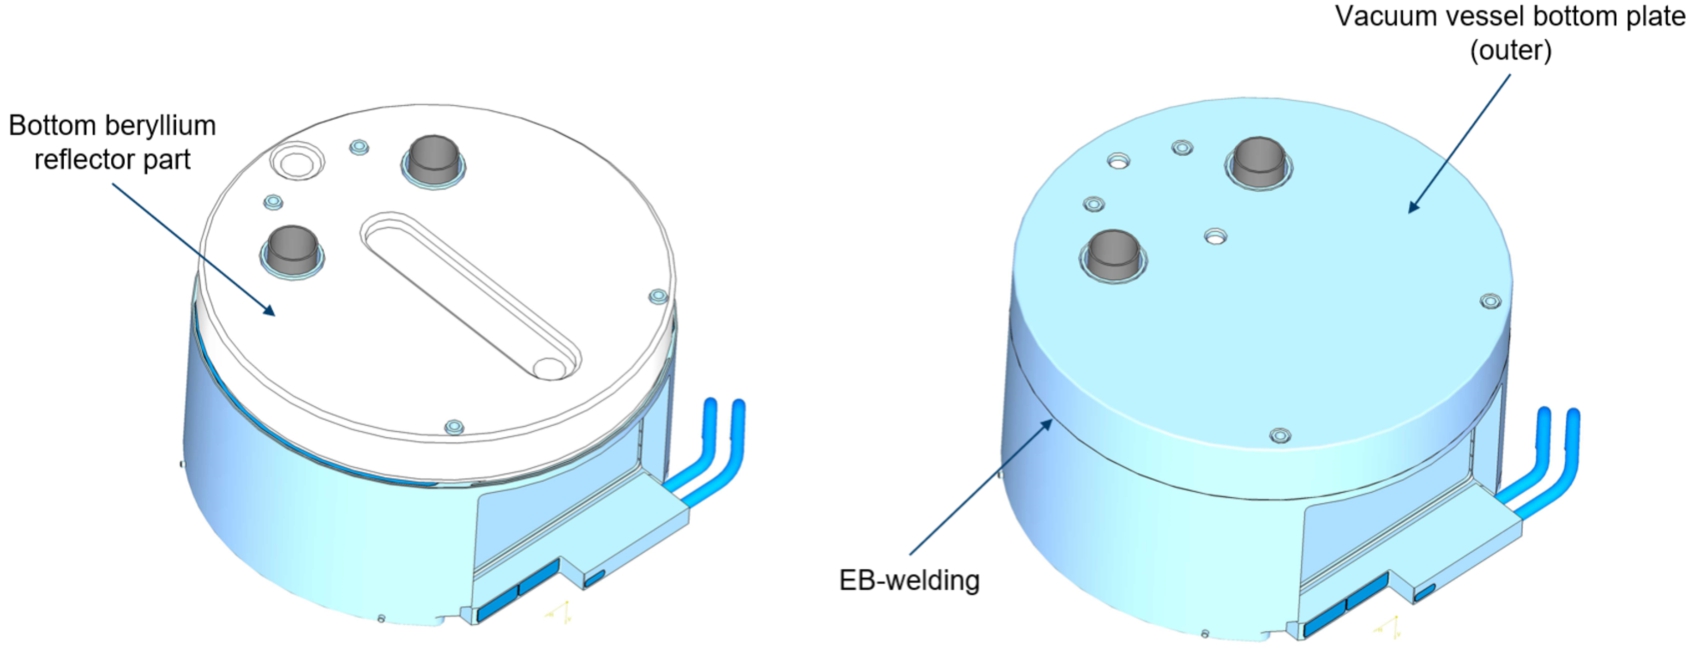 Assembly and EB-welding of the vacuum vessel (large Be reflector below the moderator).